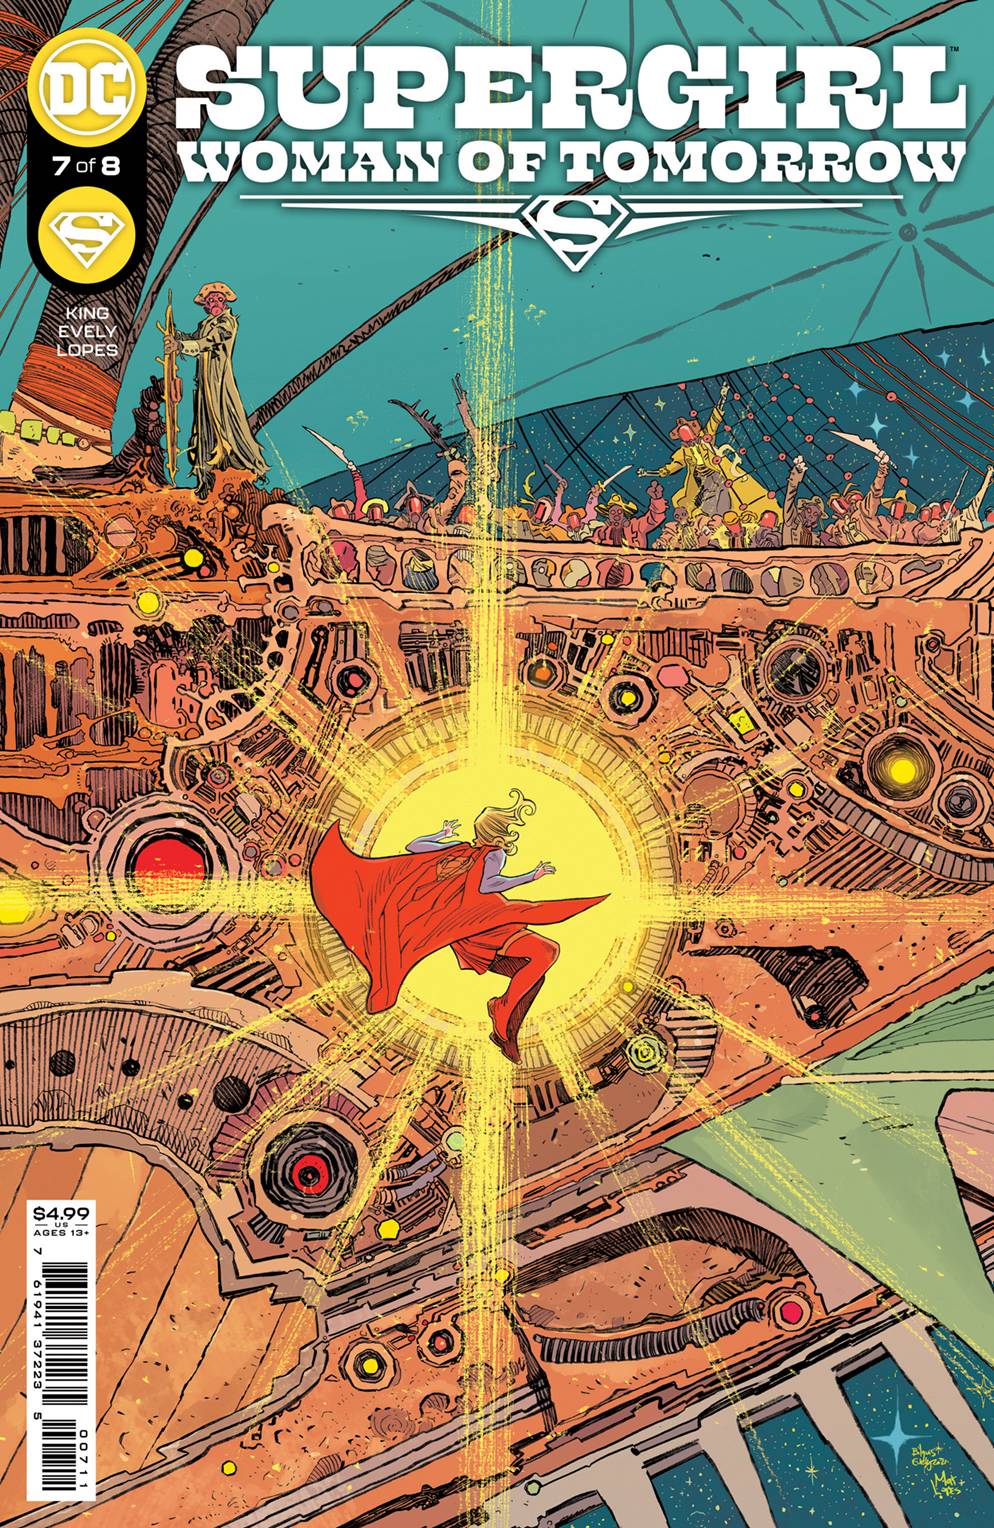 SUPERGIRL WOMAN OF TOMORROW #7 (OF 8) CVR A EVELY